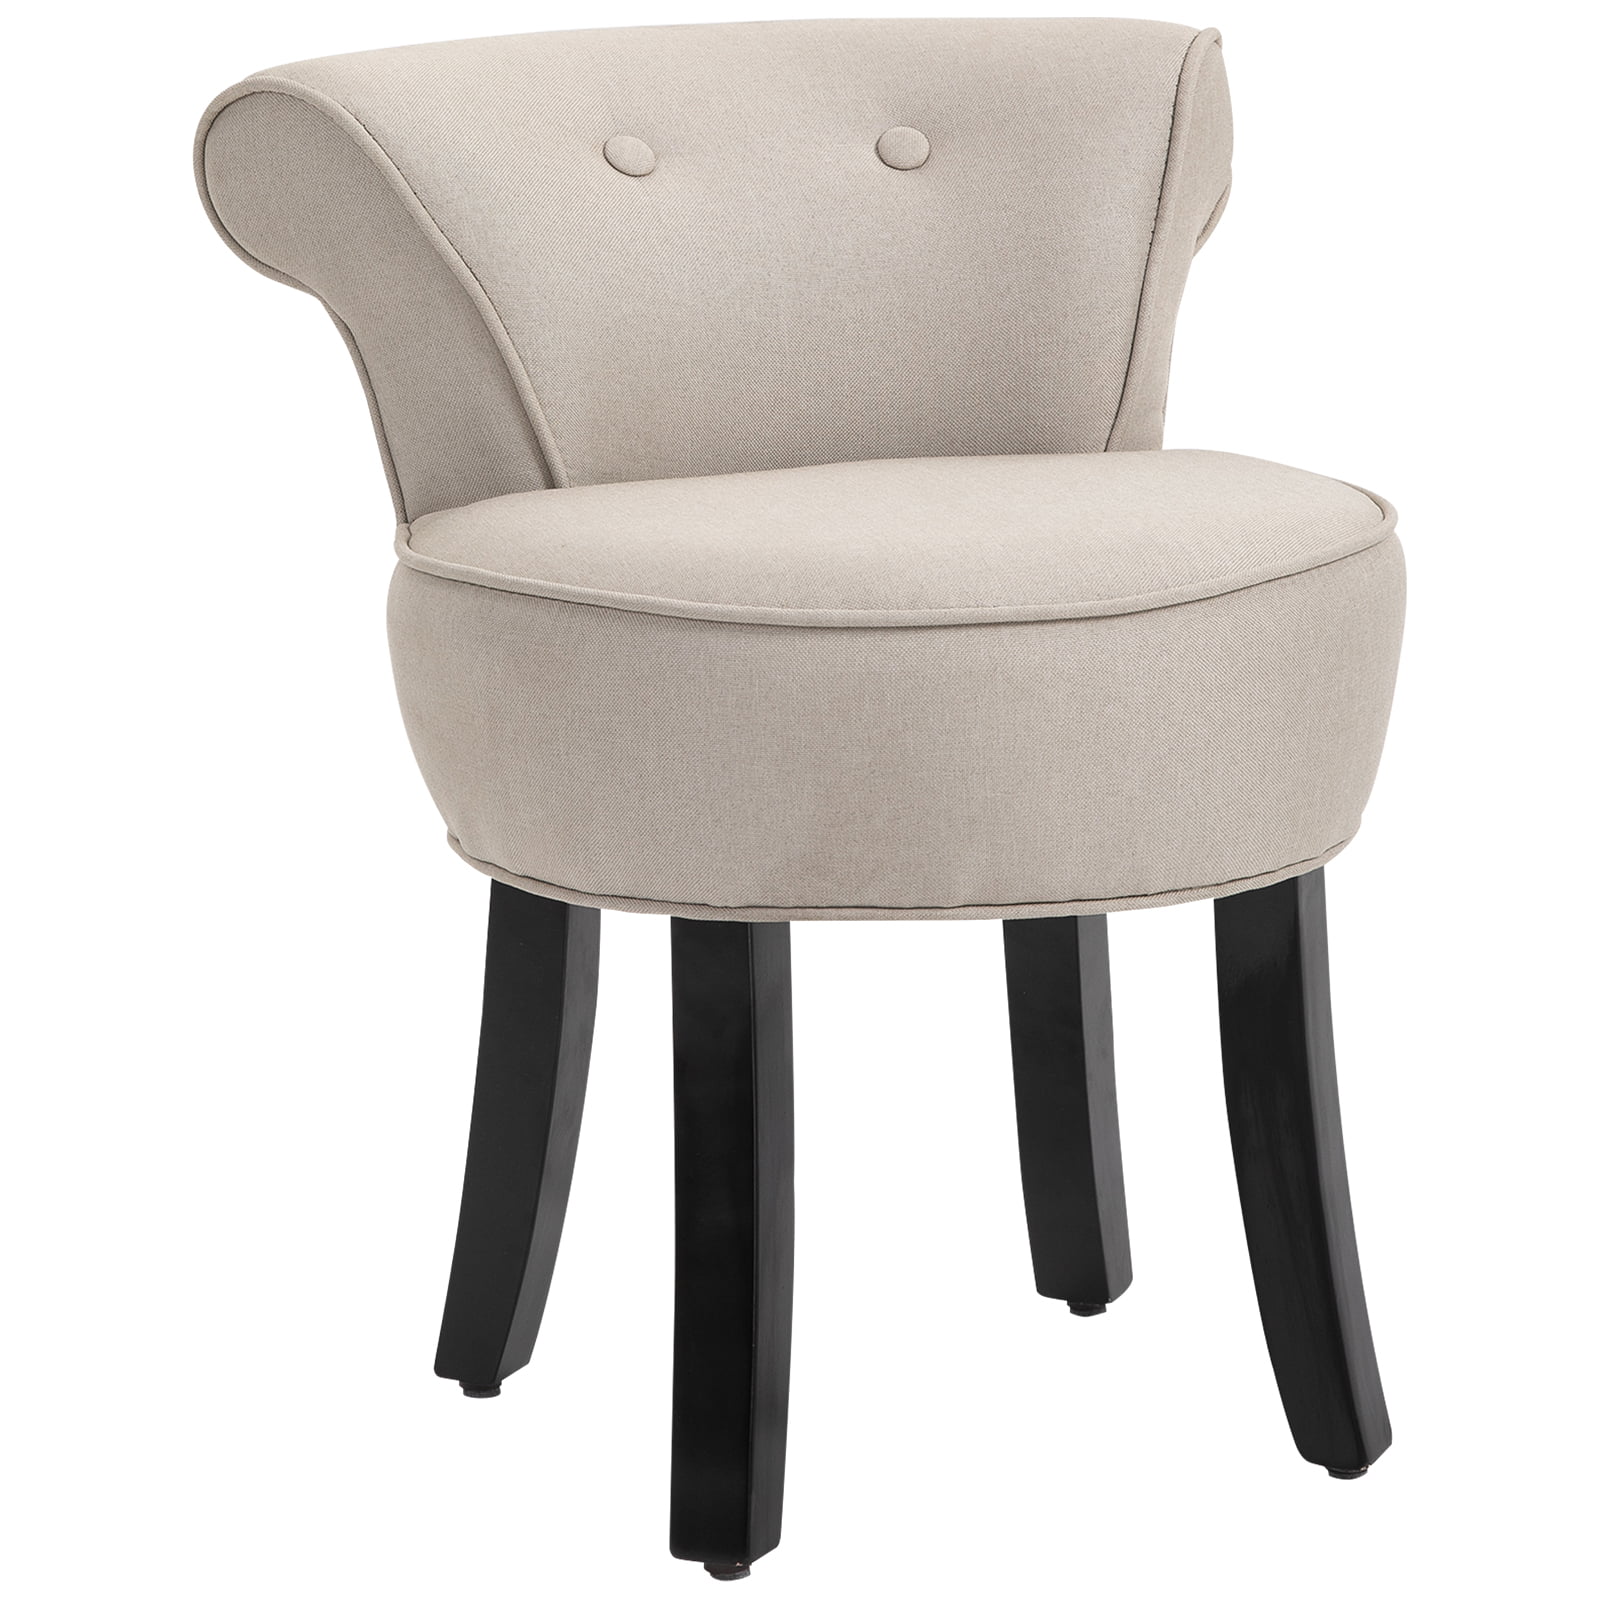 Homcom Upholstered Linen Vanity Stool With Curved Thick Padded Backrest